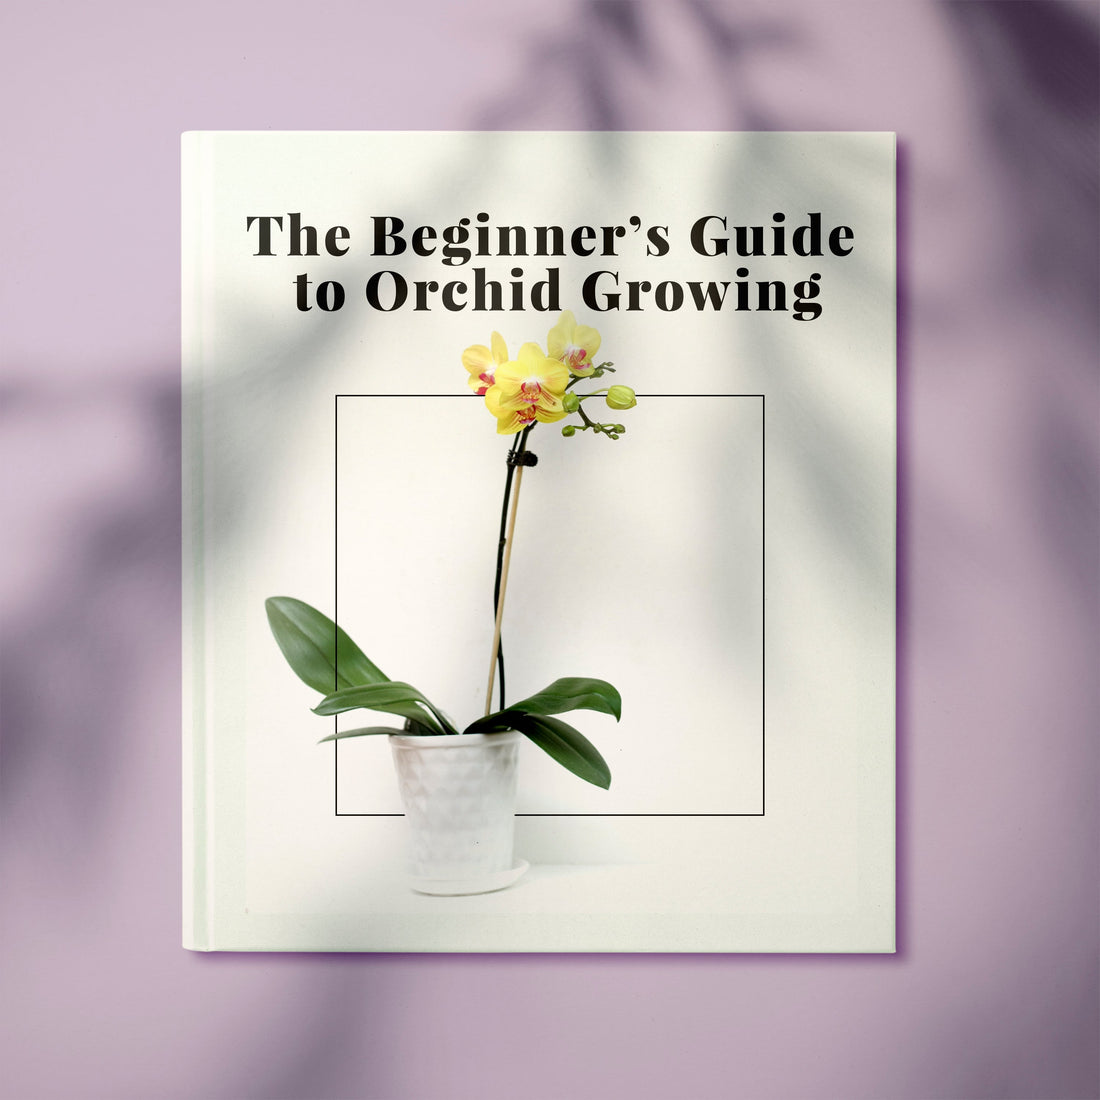 Basic Orchid Culture and Guide | The beginners guide to orchid growing at home